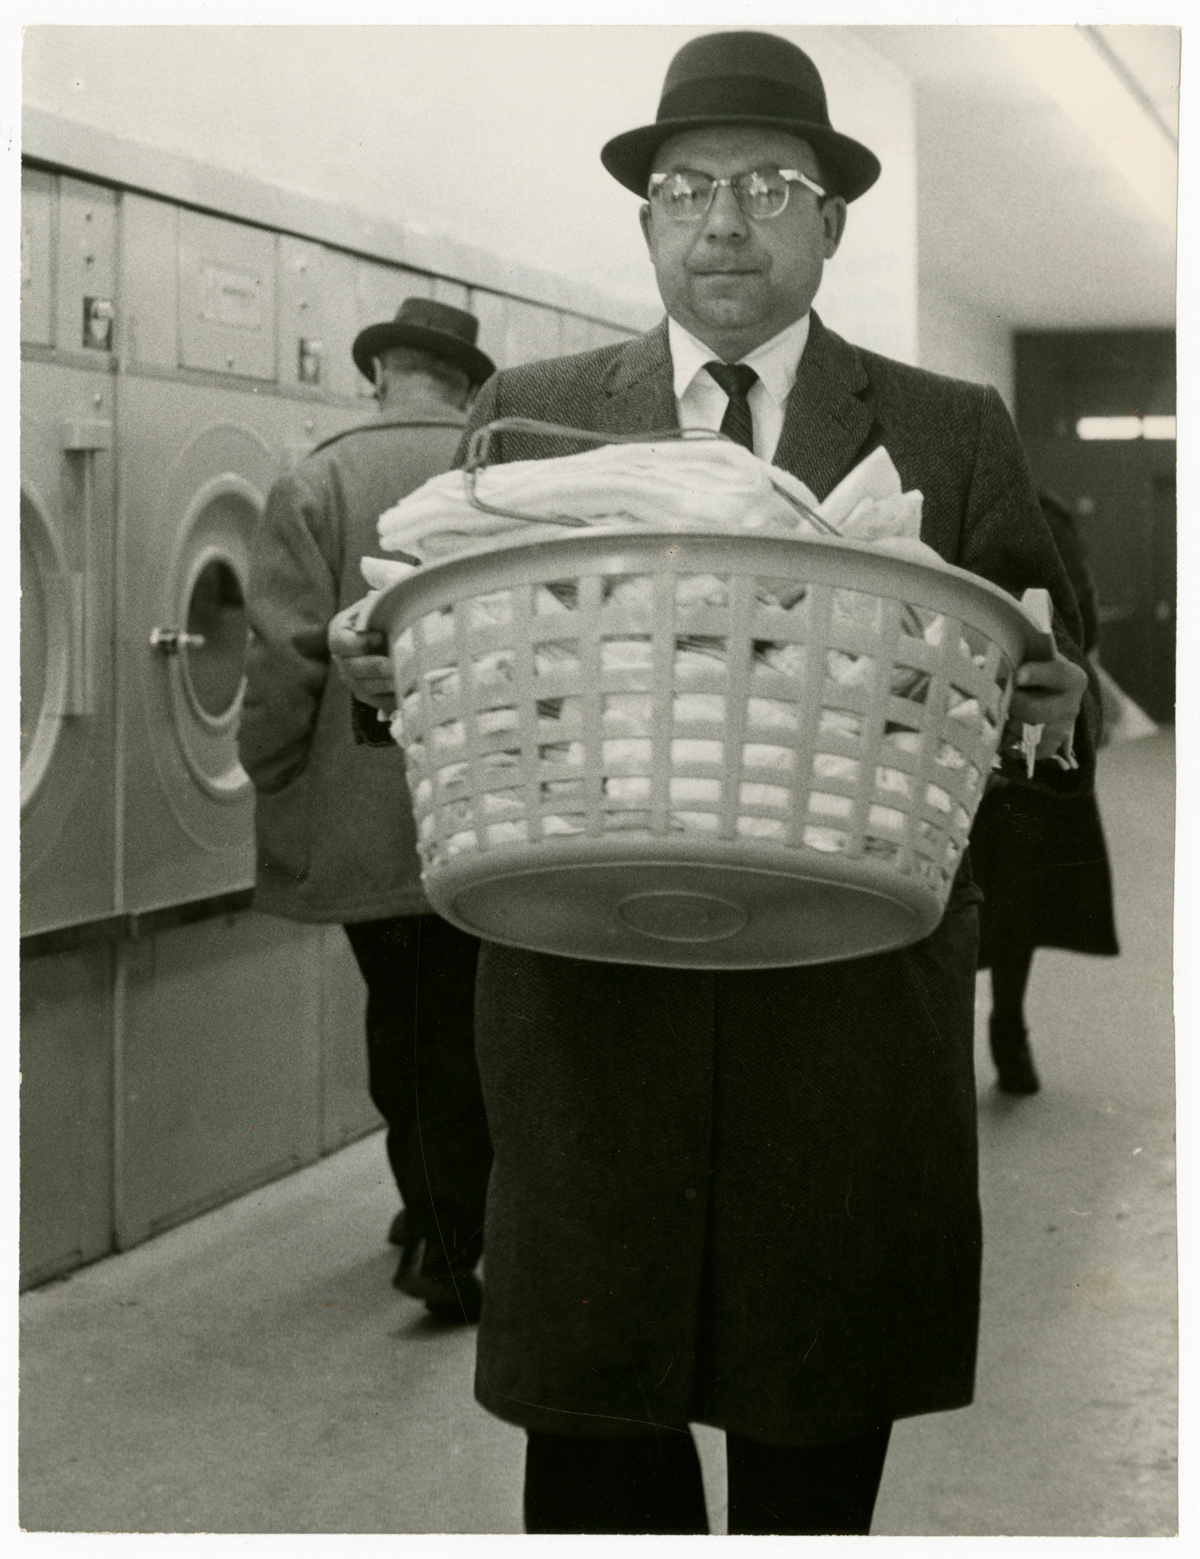     Erik Christensen (formerly known as Erik Schack), Laundromat, 1960. Gelatin silver print, 9 x 7&#8243;. Gift of The Globe and Mail newspaper to the Canadian Photography Institute of the National Gallery of Canada.

